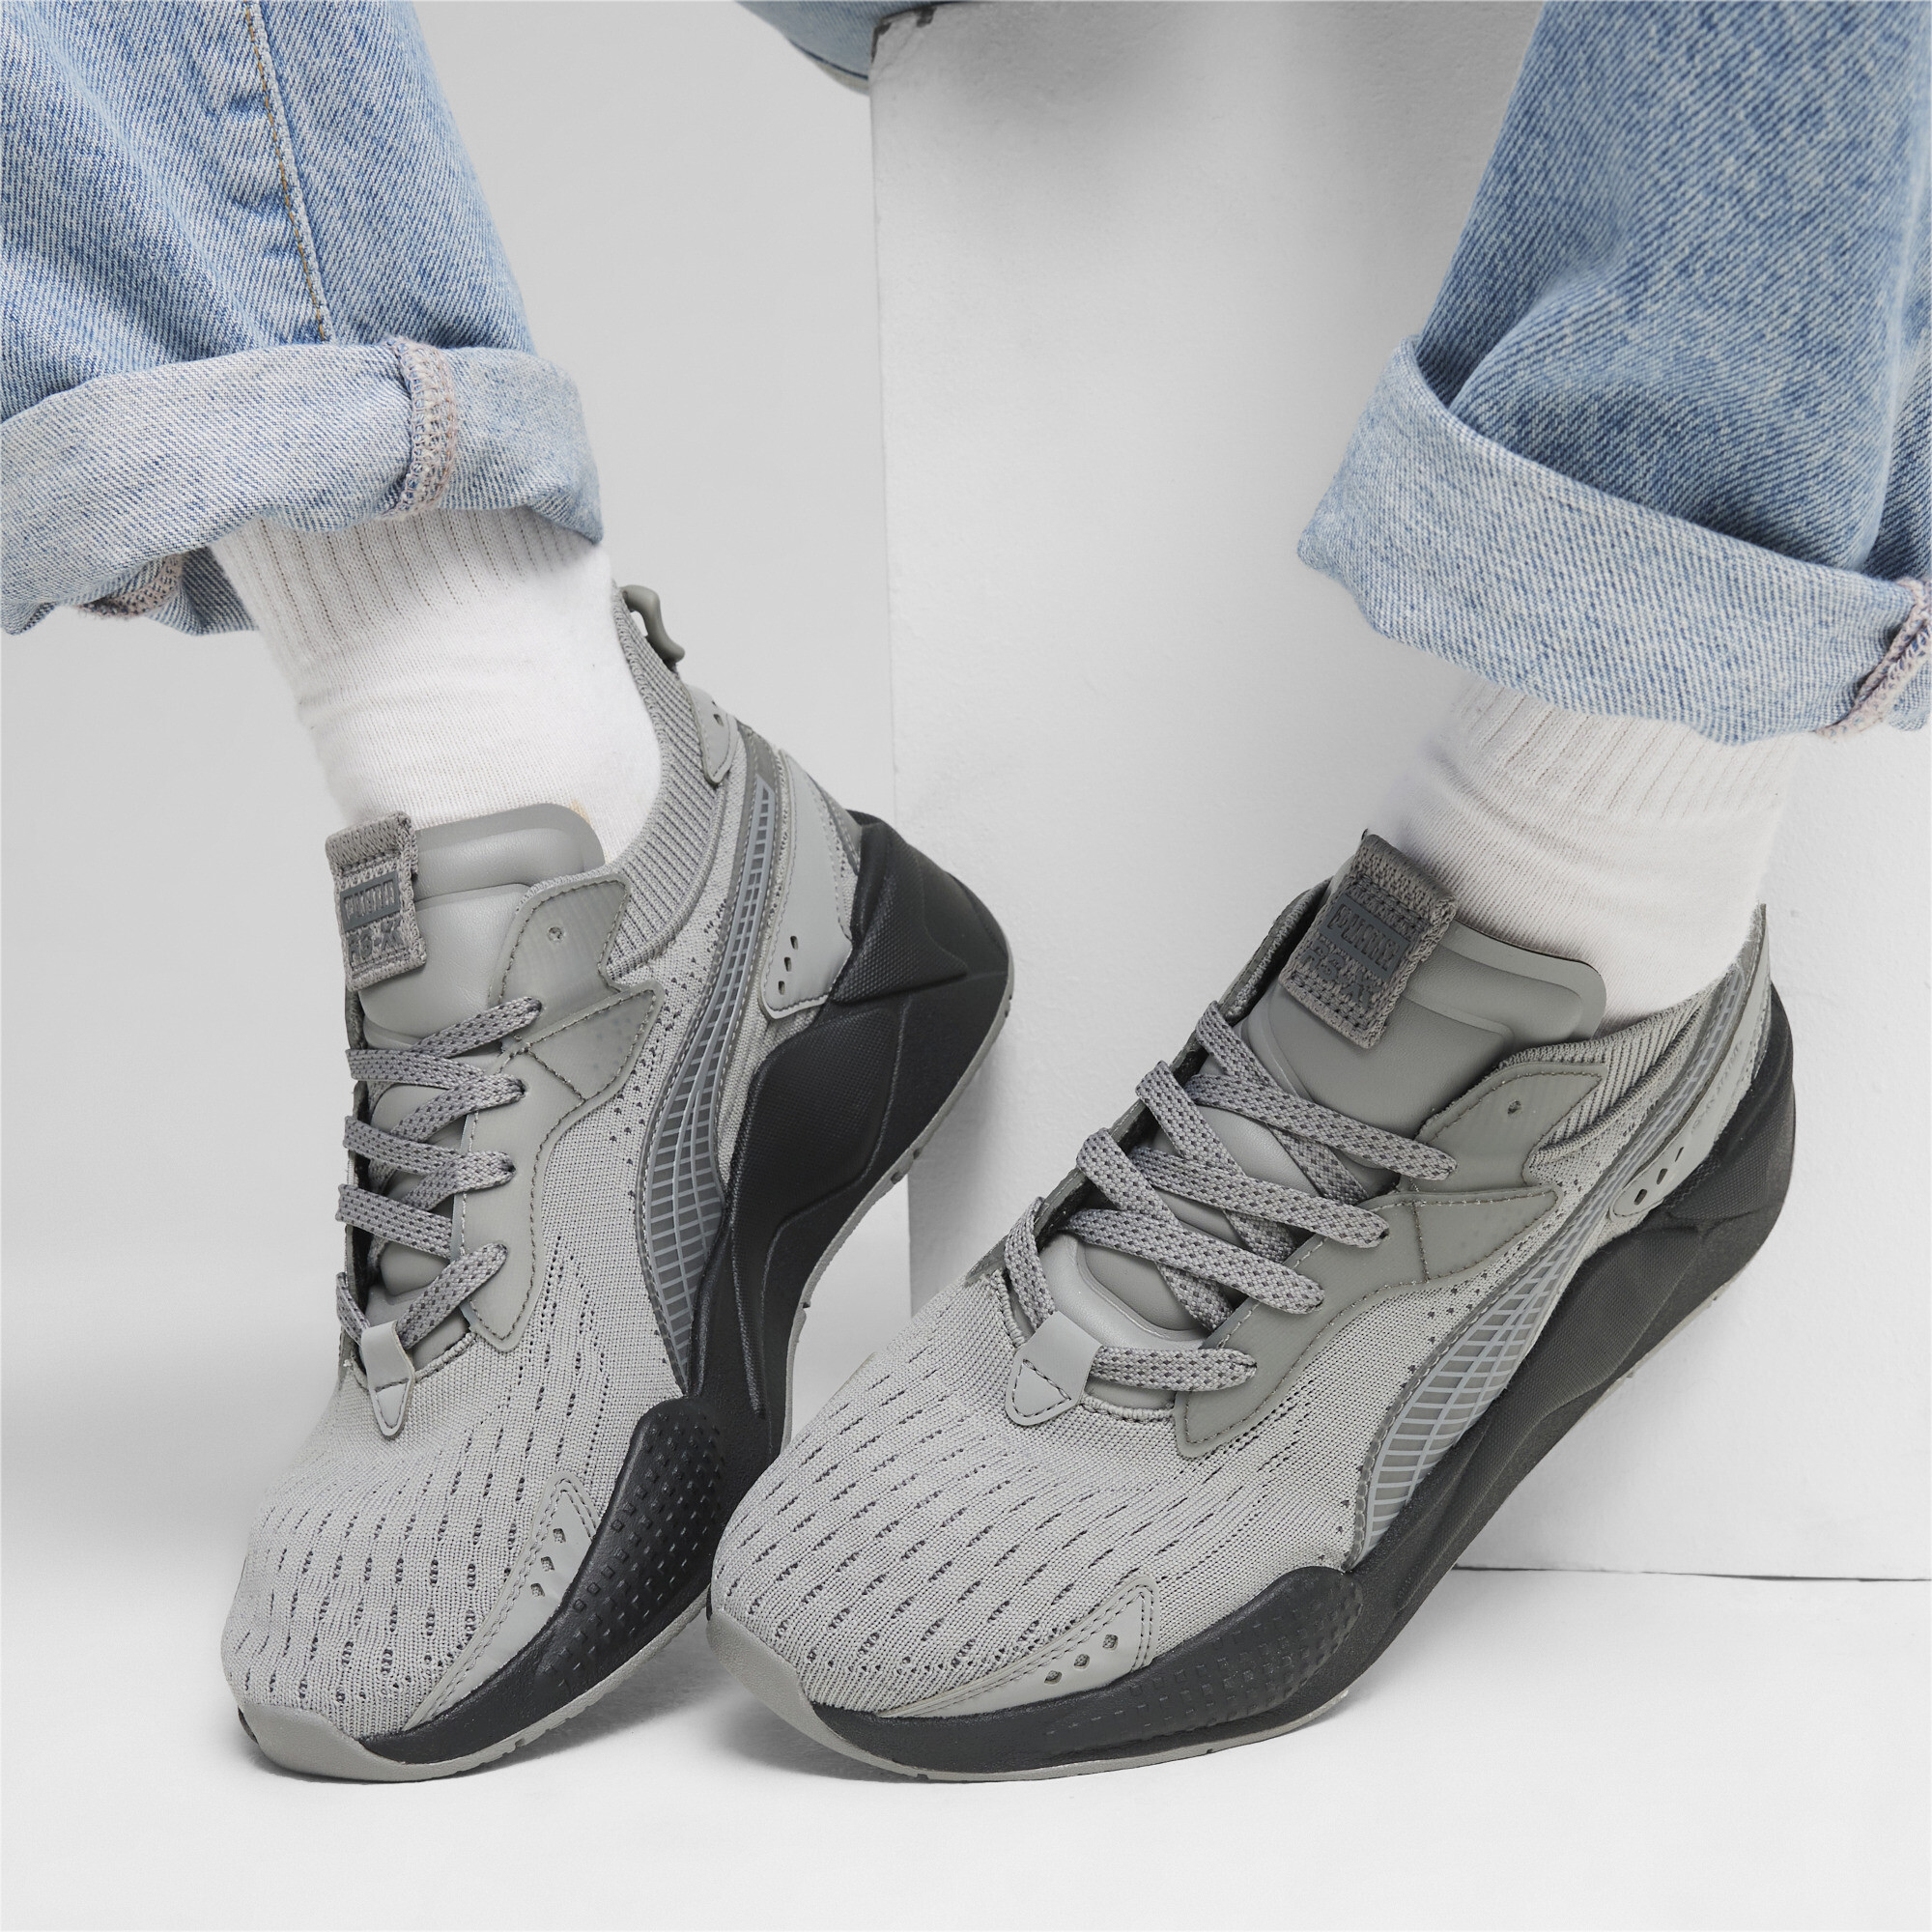 Puma RS-XK REMIX Sneakers, Gray, Size 37.5, Shoes